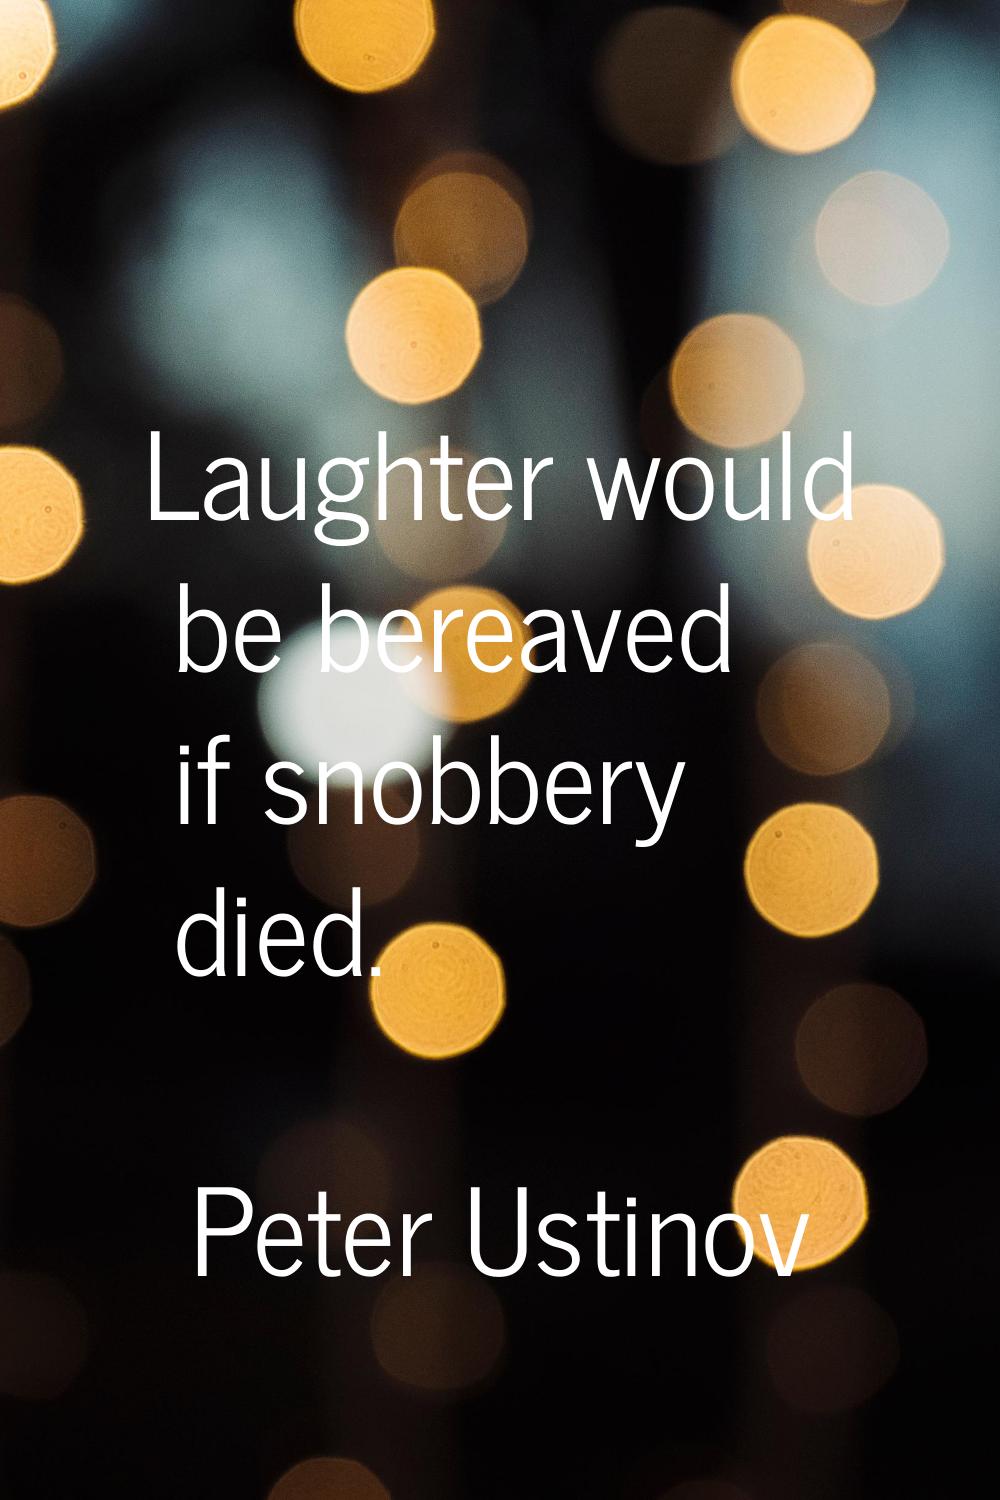 Laughter would be bereaved if snobbery died.